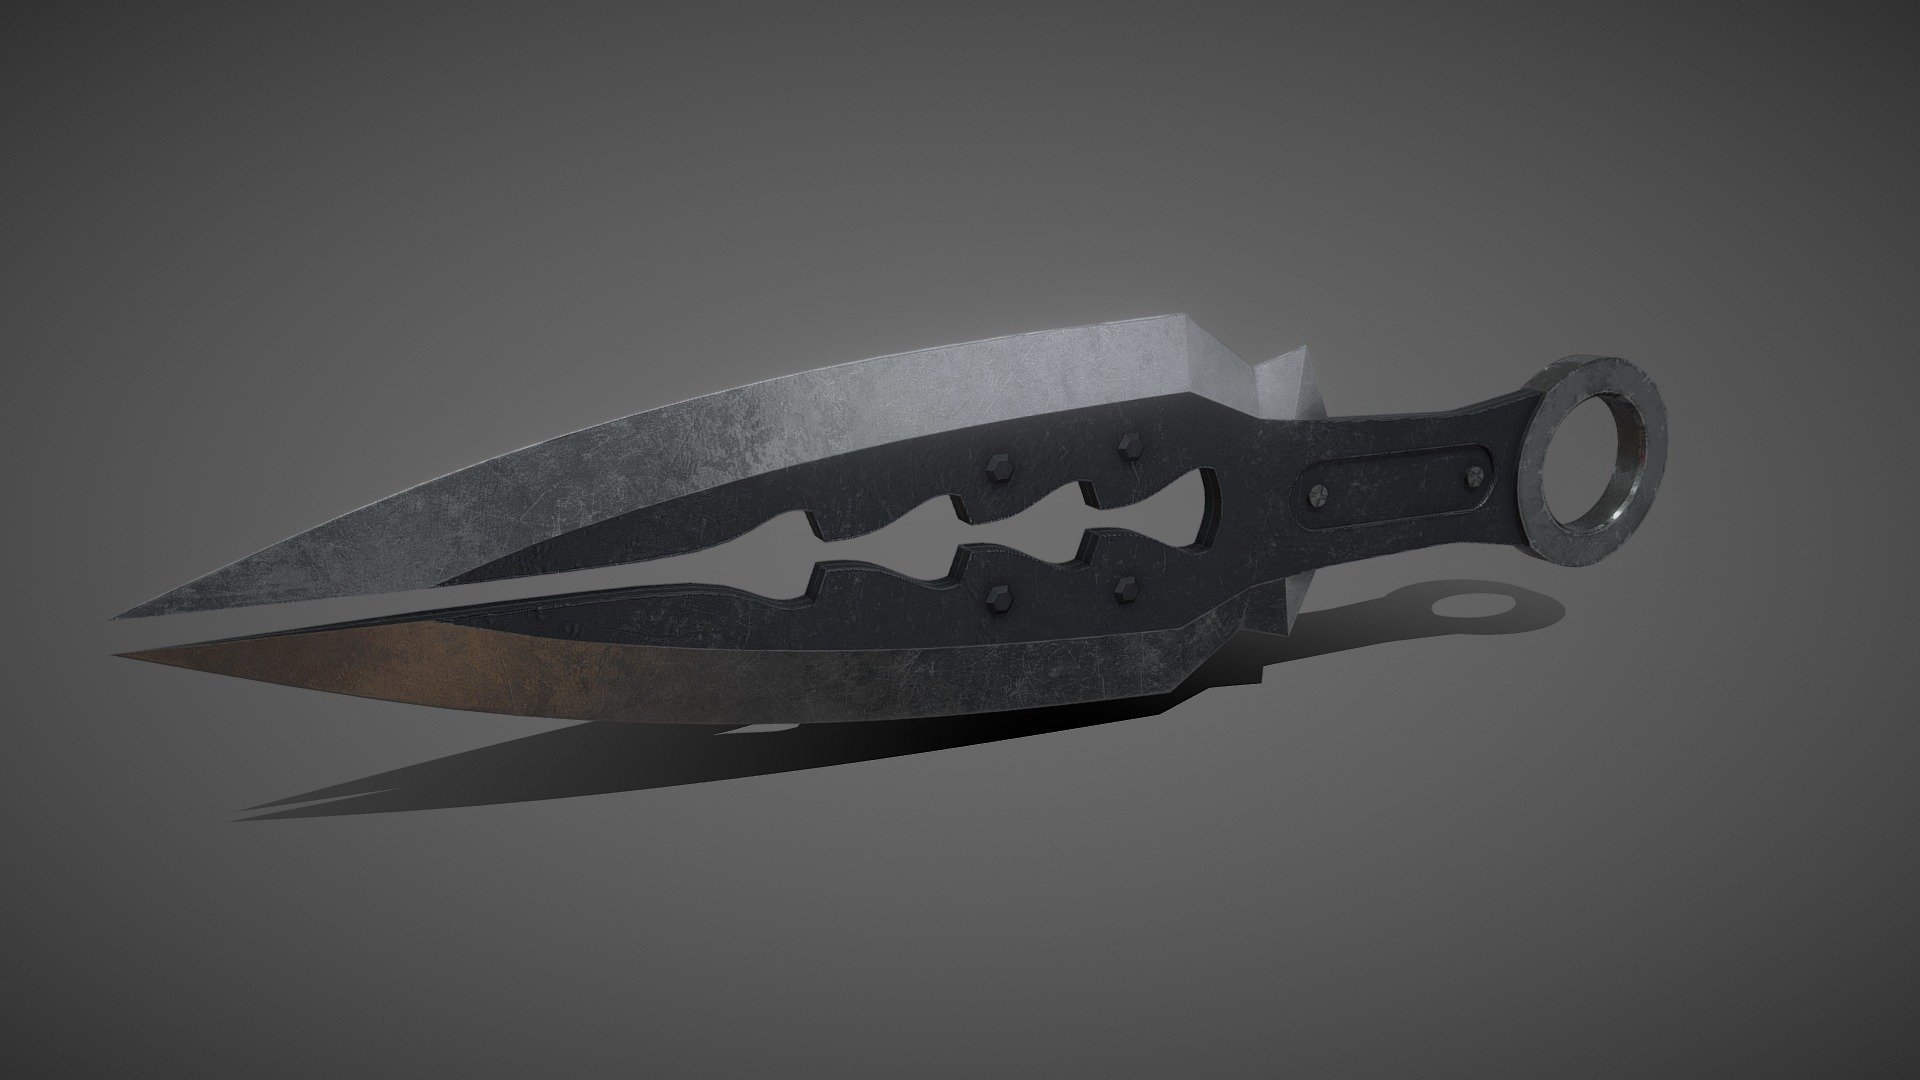 Kunai Knife
This is the first 3D-Model that I am uploading. It is inspired by the Kunai Knife from the game Krunker.io 3d model